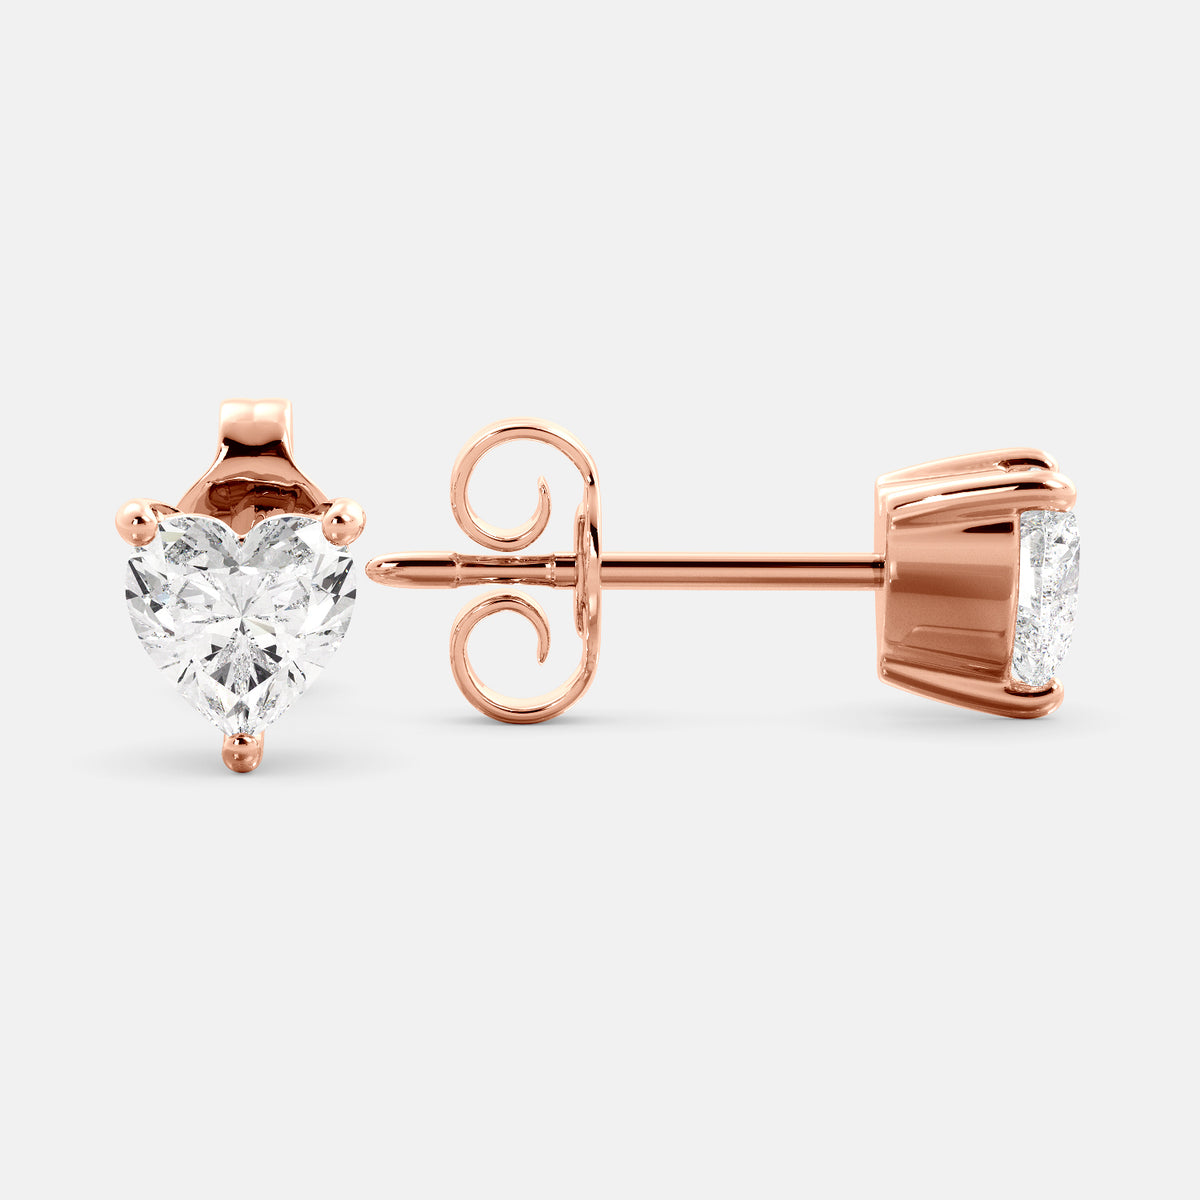 A close-up of a pair of heart-shaped diamond stud earrings in recycled rose gold. Each earring is set with a single heart shape diamond in the center. The earrings are made of recycled rose gold and have a simple, elegant design. The diamonds are sparkling and reflect light beautifully. The earrings are a perfect gift for a loved one or a special occasion.